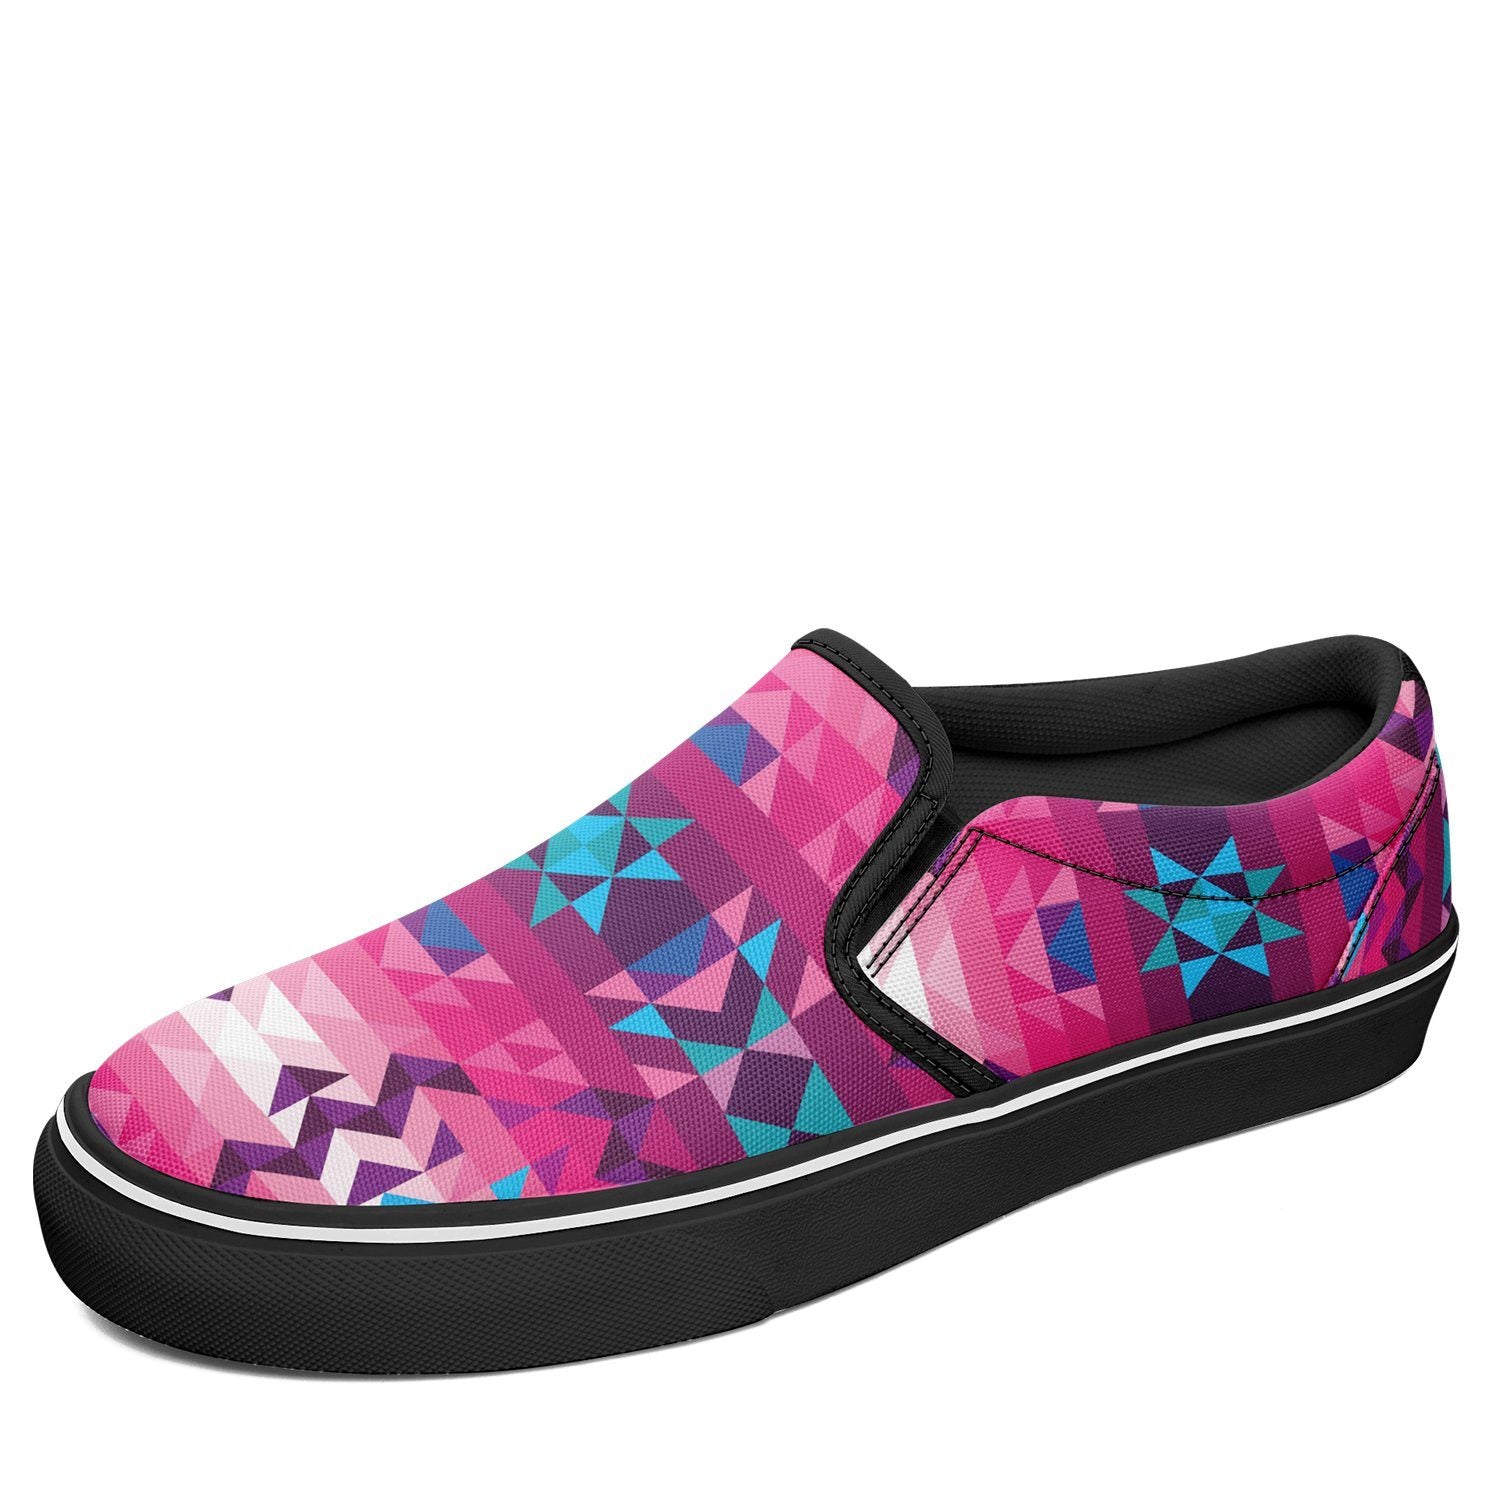 Bright Wave Otoyimm Canvas Slip On Shoes otoyimm Herman US Youth 1 / EUR 32 Black Sole 